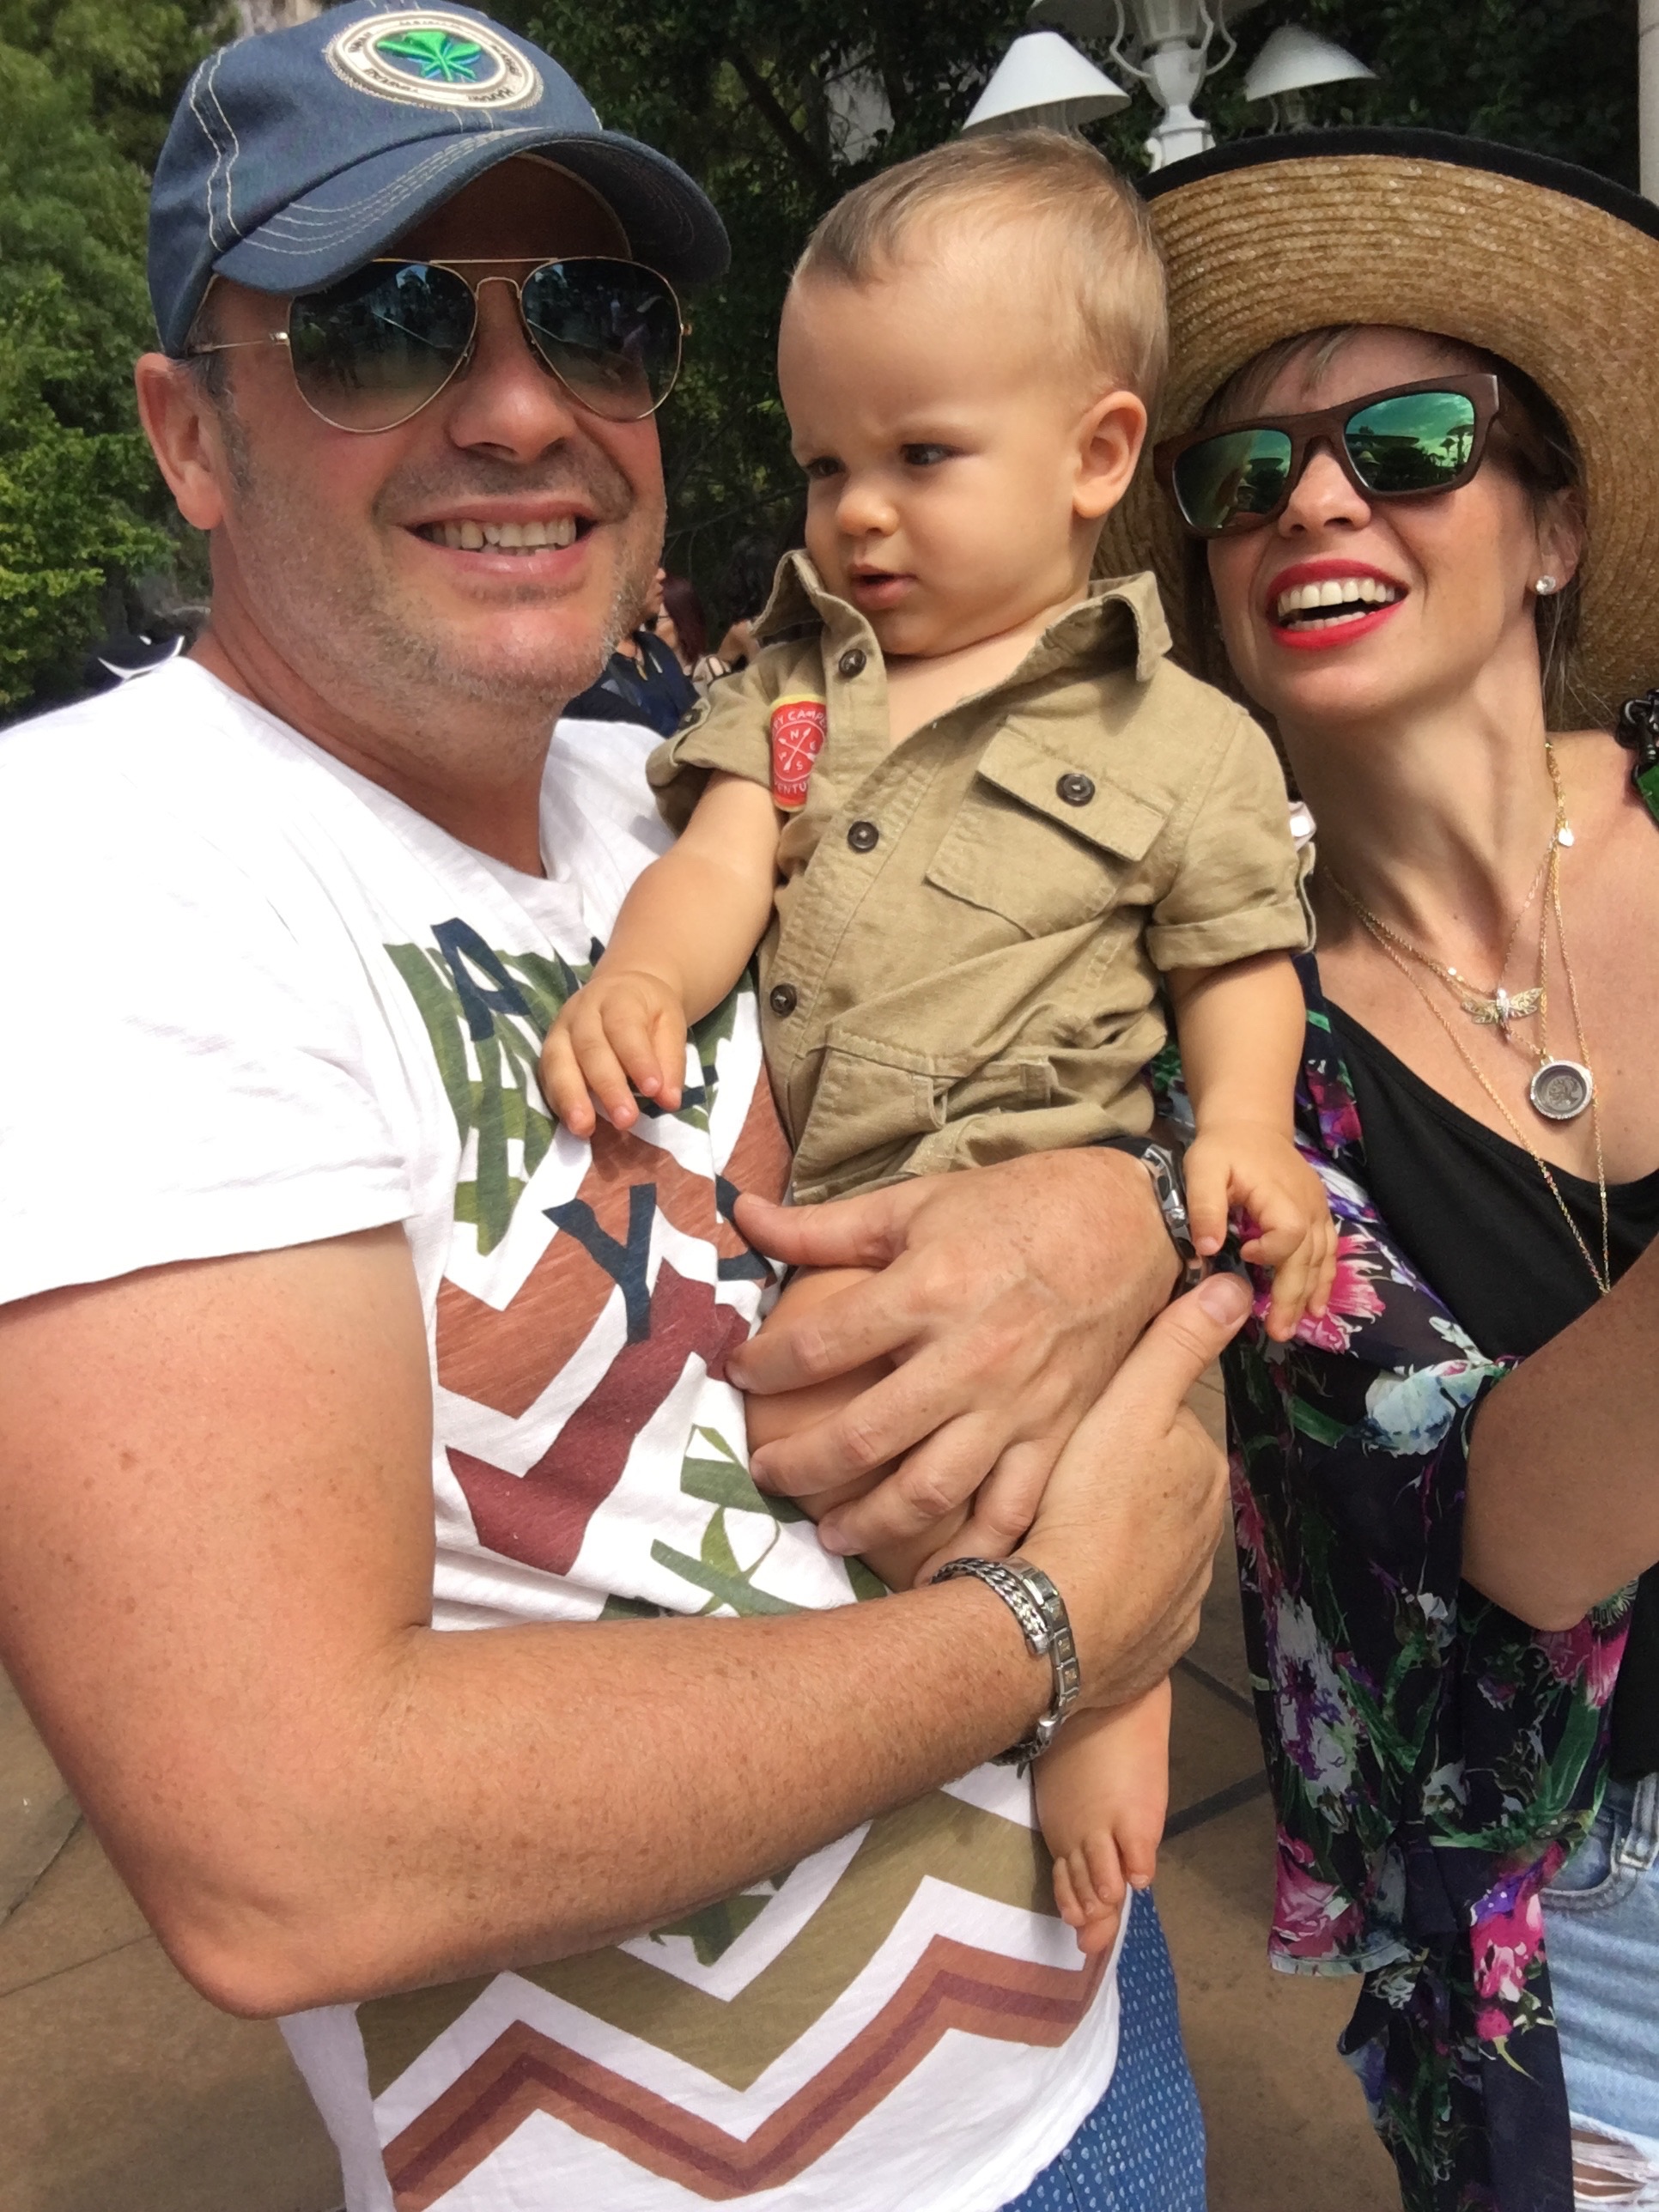 Alba Marina fashion blogger of Mylovelypeople blog share with all of you a tribute's post for Father's Day